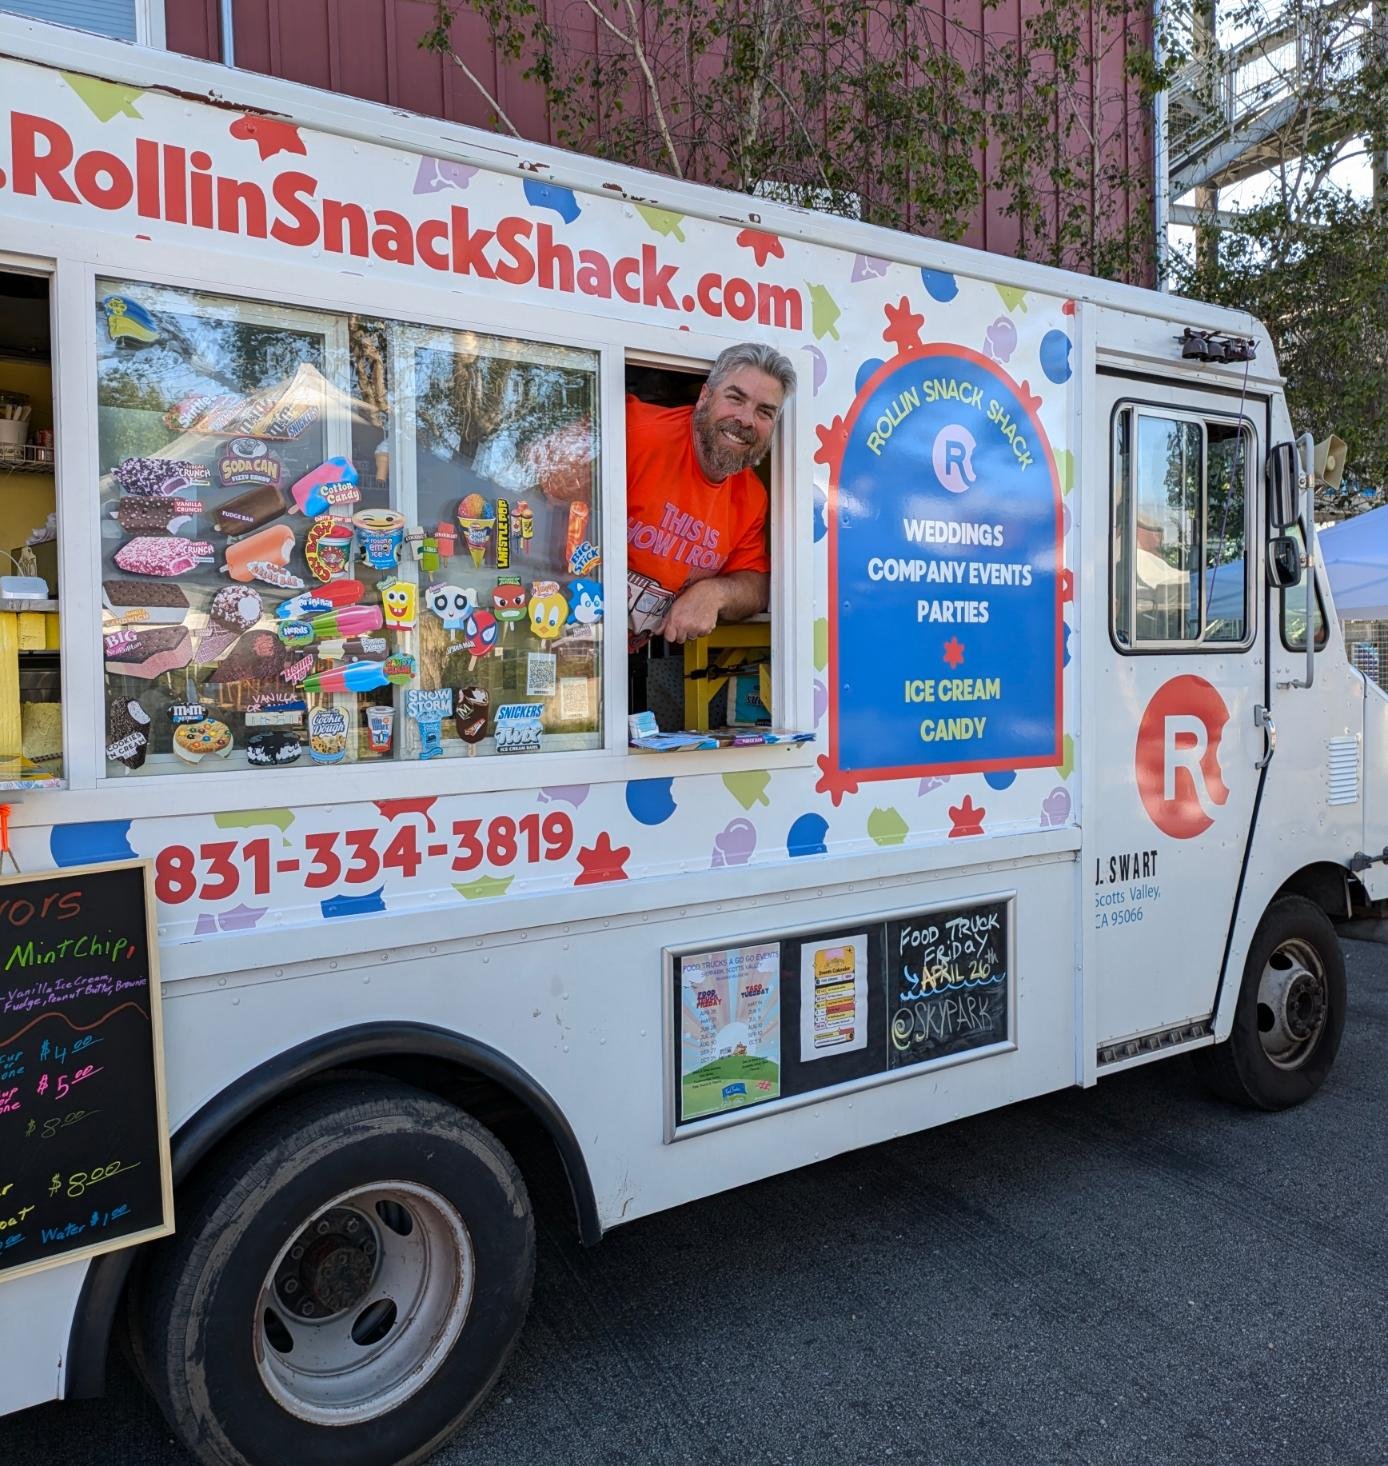 Check out our ice cream truck's new name and truck wrap! Uncle Josh's Rollin Snack Shack! All the same ice cream treats you know and love from Aunt Lali's plus candy and more to come! 

Over the next few days we'll be updating the @auntlali name on I